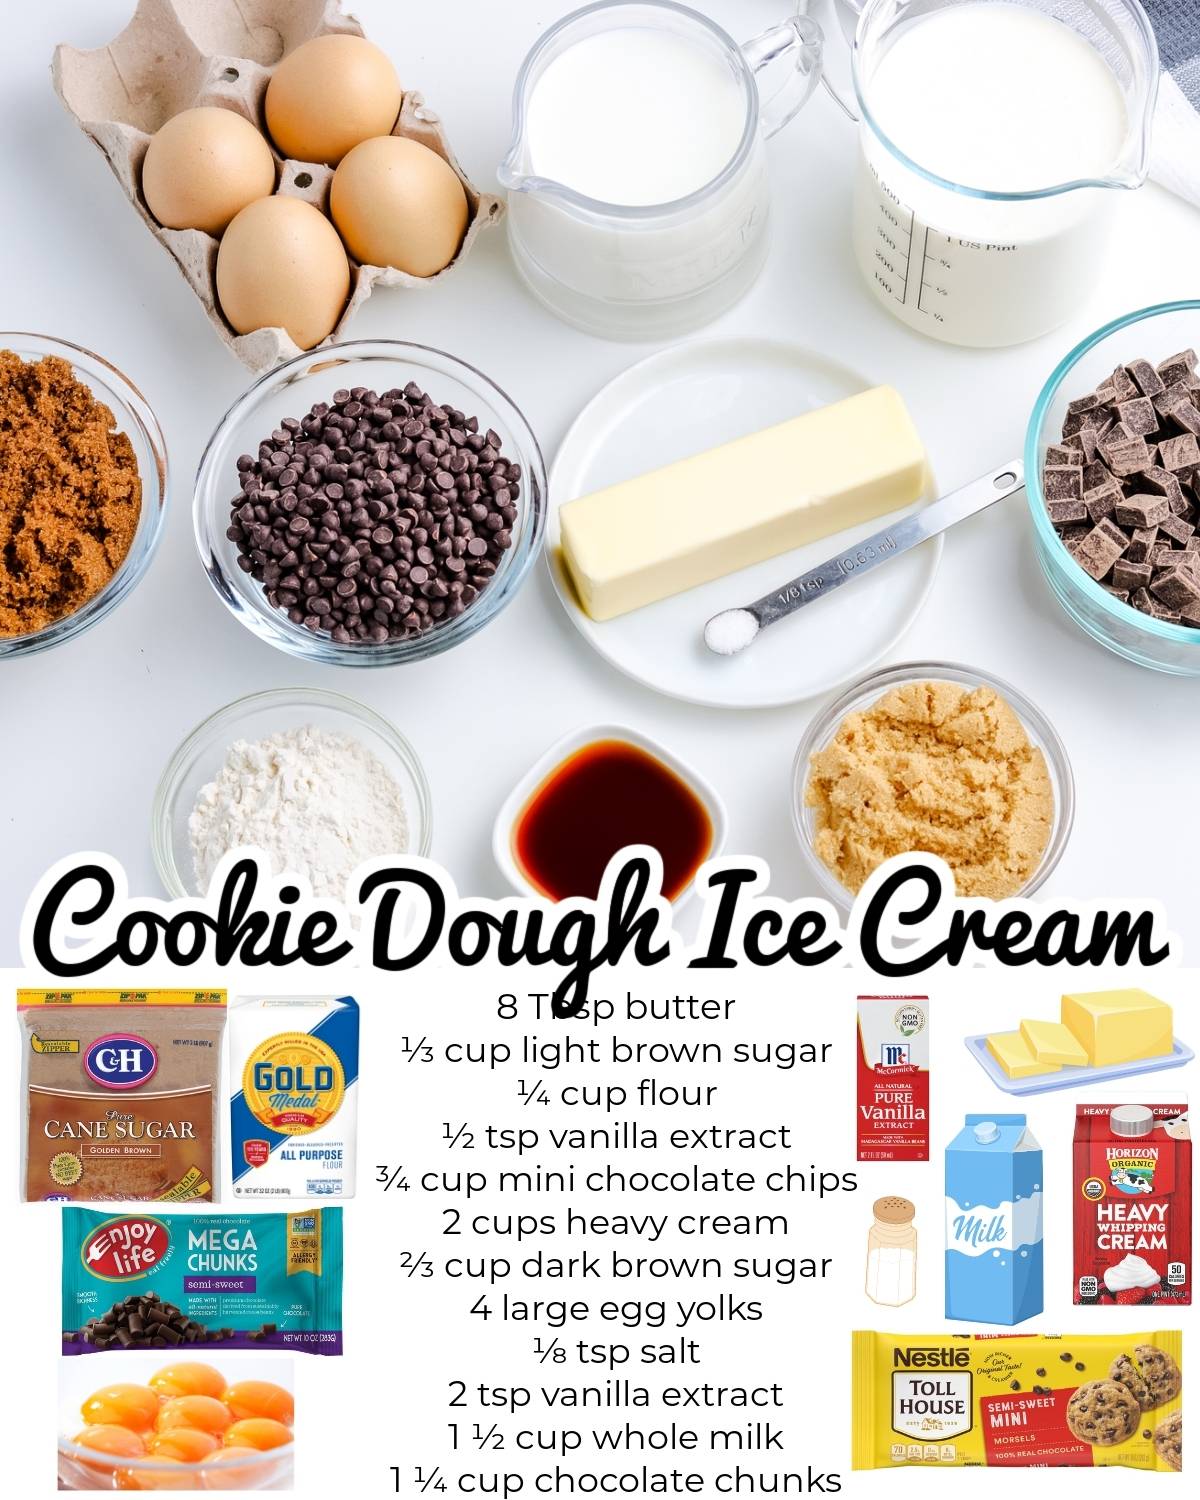 All of the ingredients needed to make this Cookie Dough Ice Cream recipe.